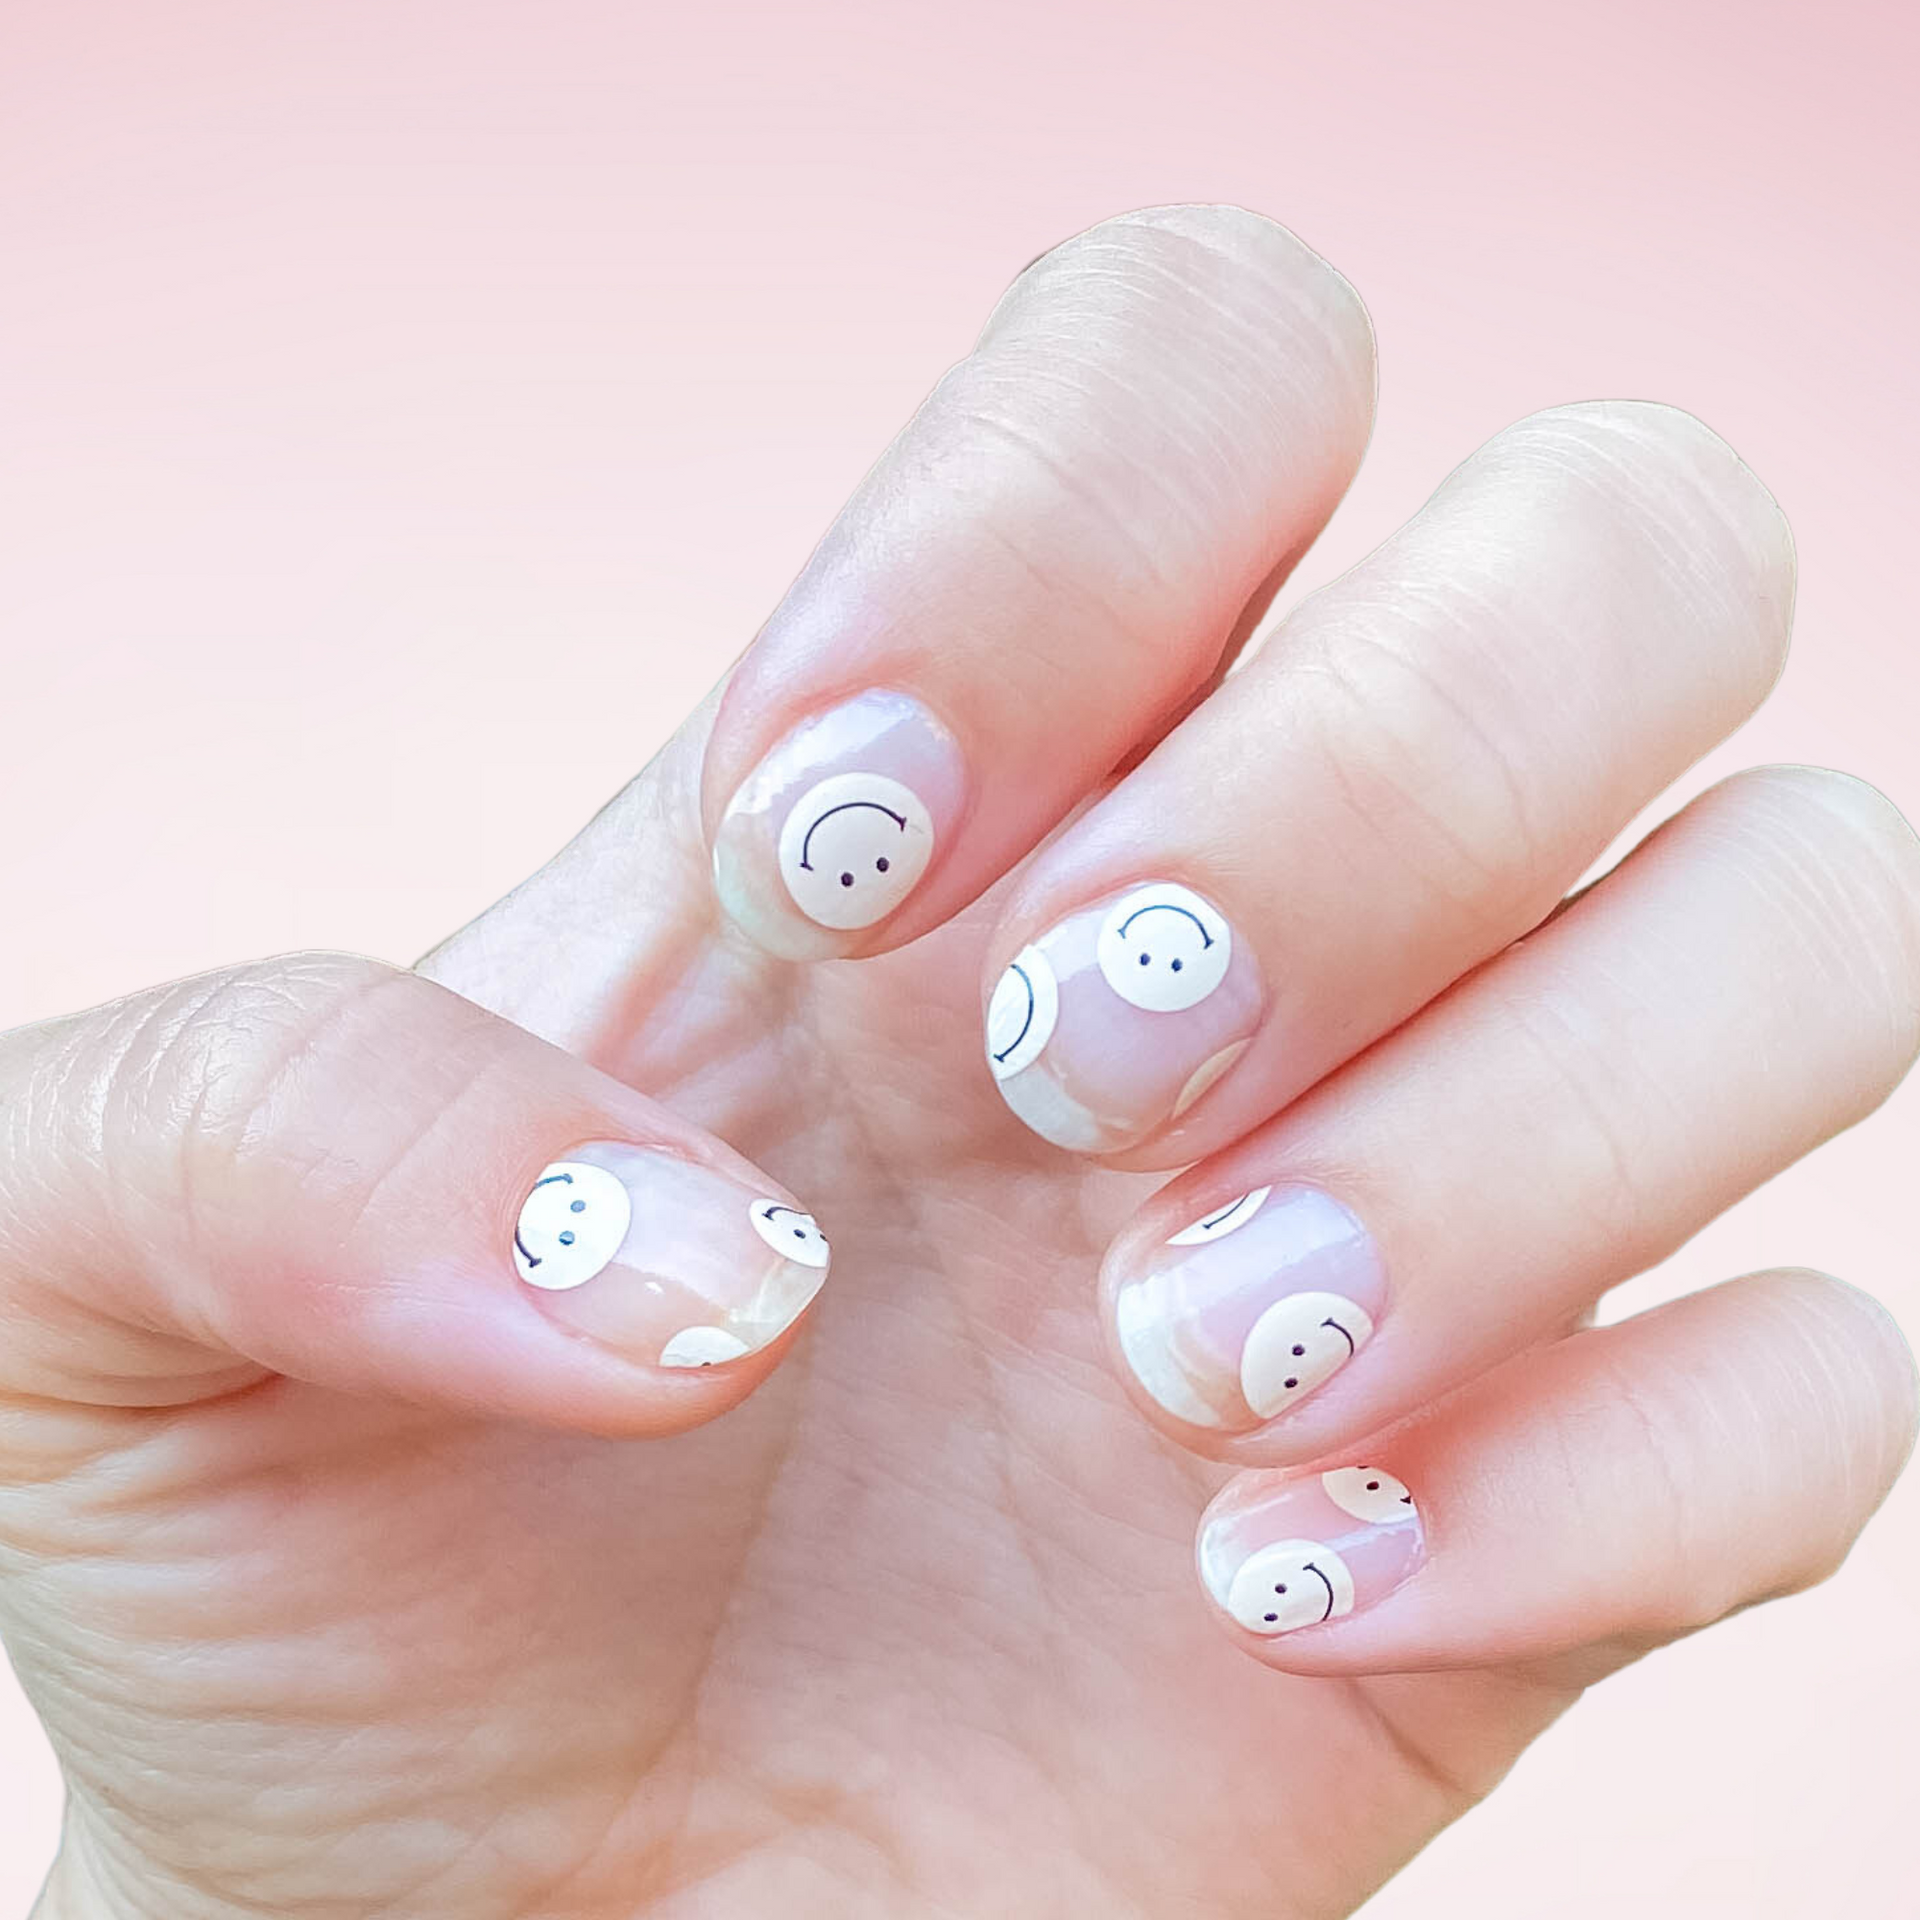 Smiley Face Nail Art Stickers – Pretty Fab Nails